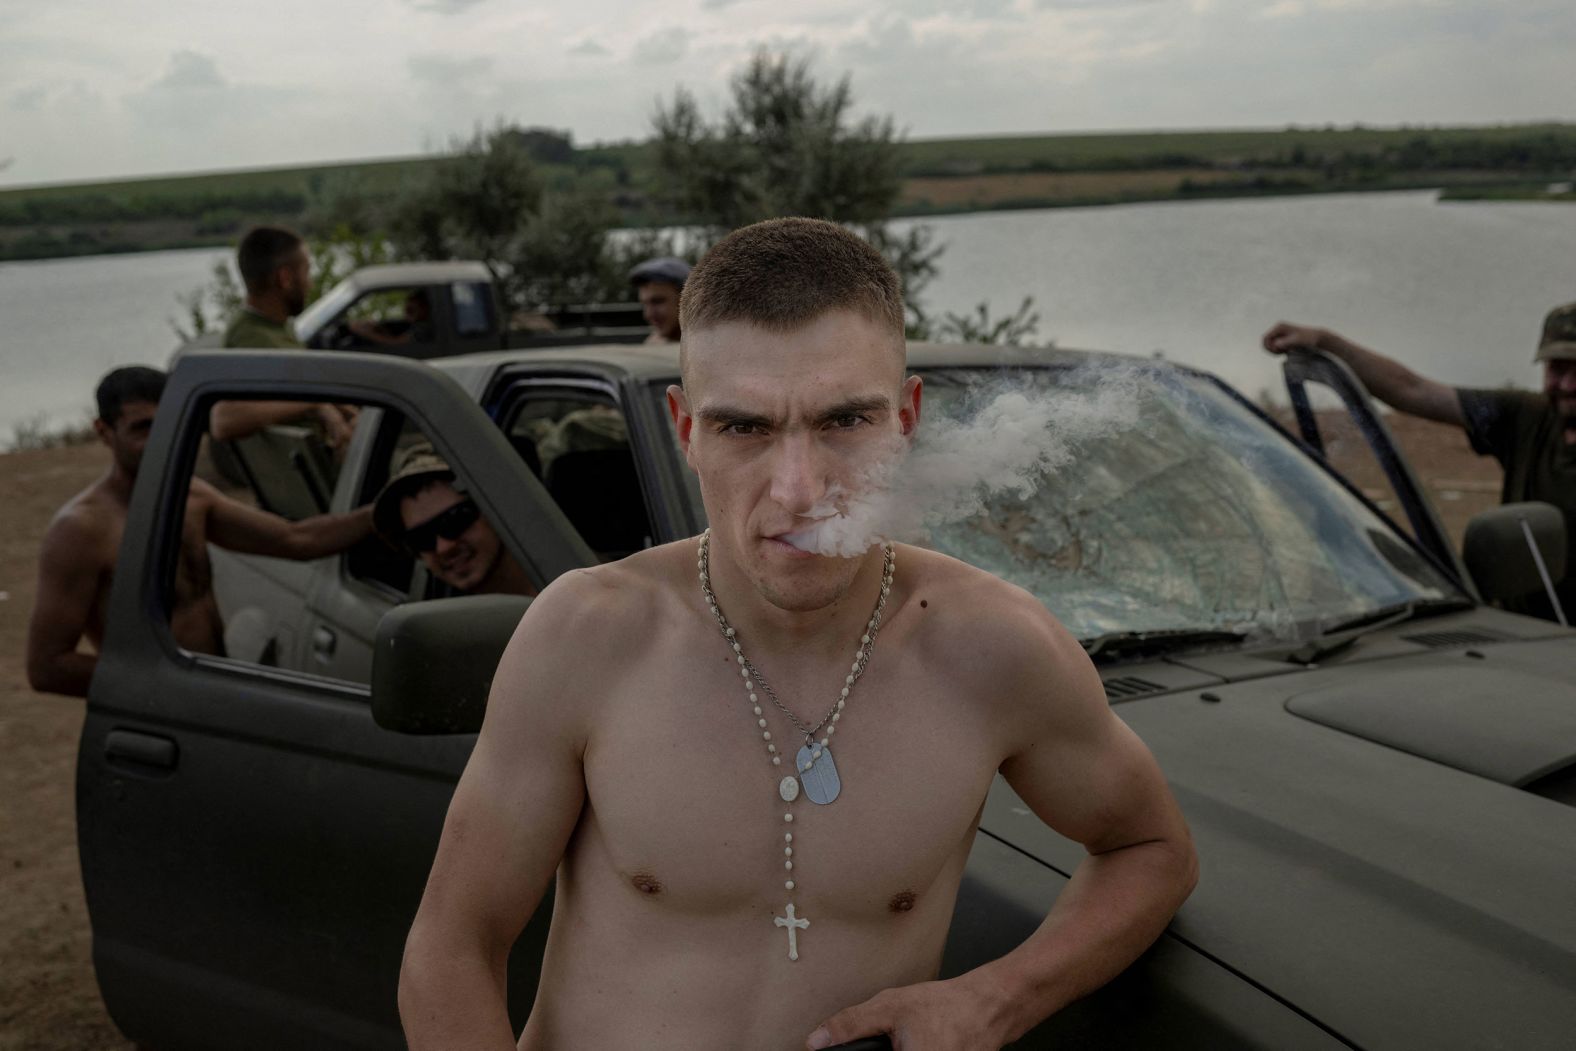 Ukrainian soldiers relax away from the front line in the Donbas region on Wednesday, August 10.